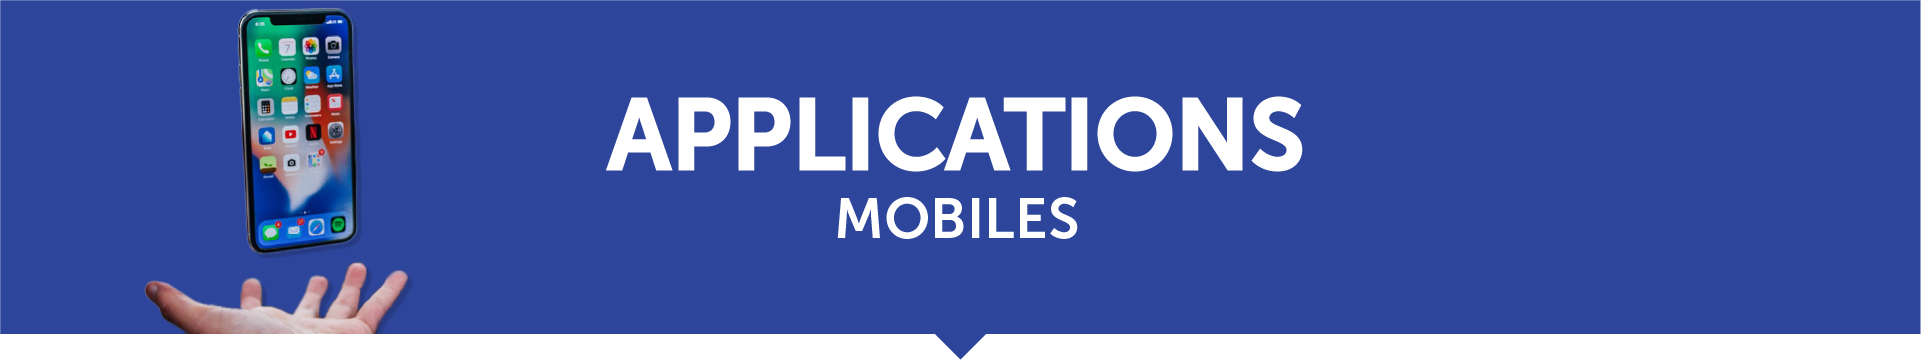 Applications mobiles